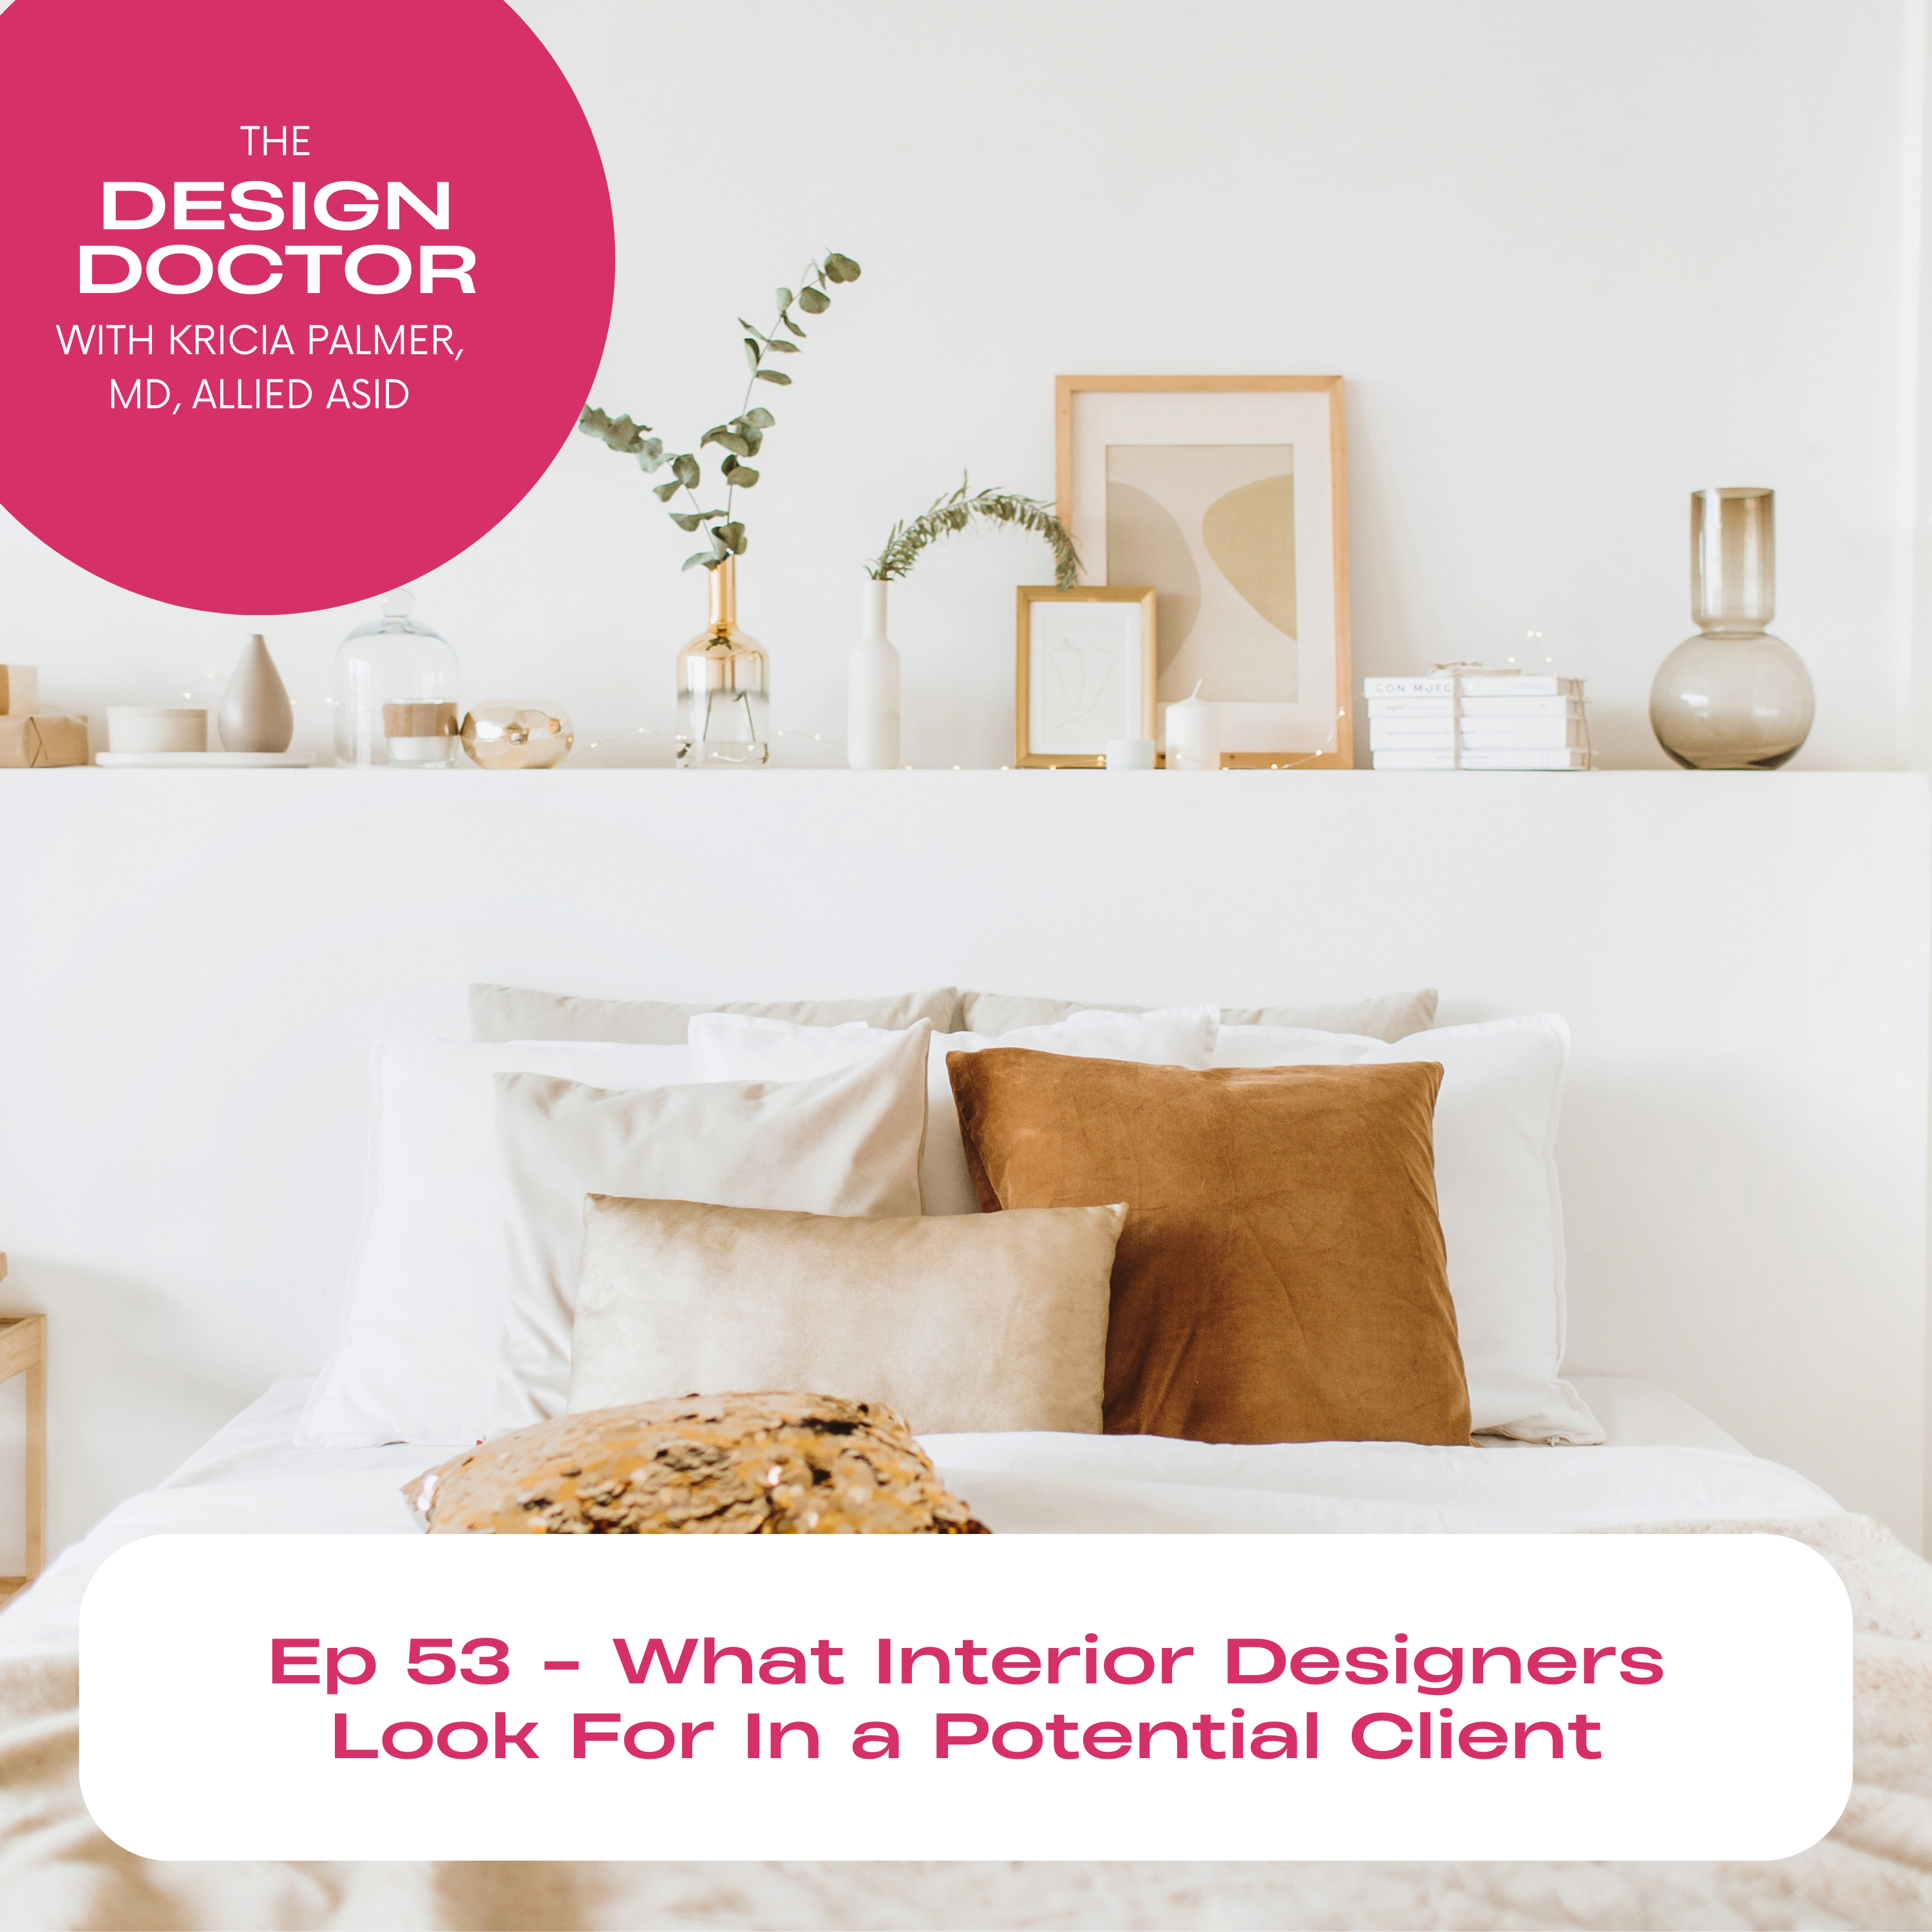 Episode 53 - What Interior Designers Look For In a Potential Client